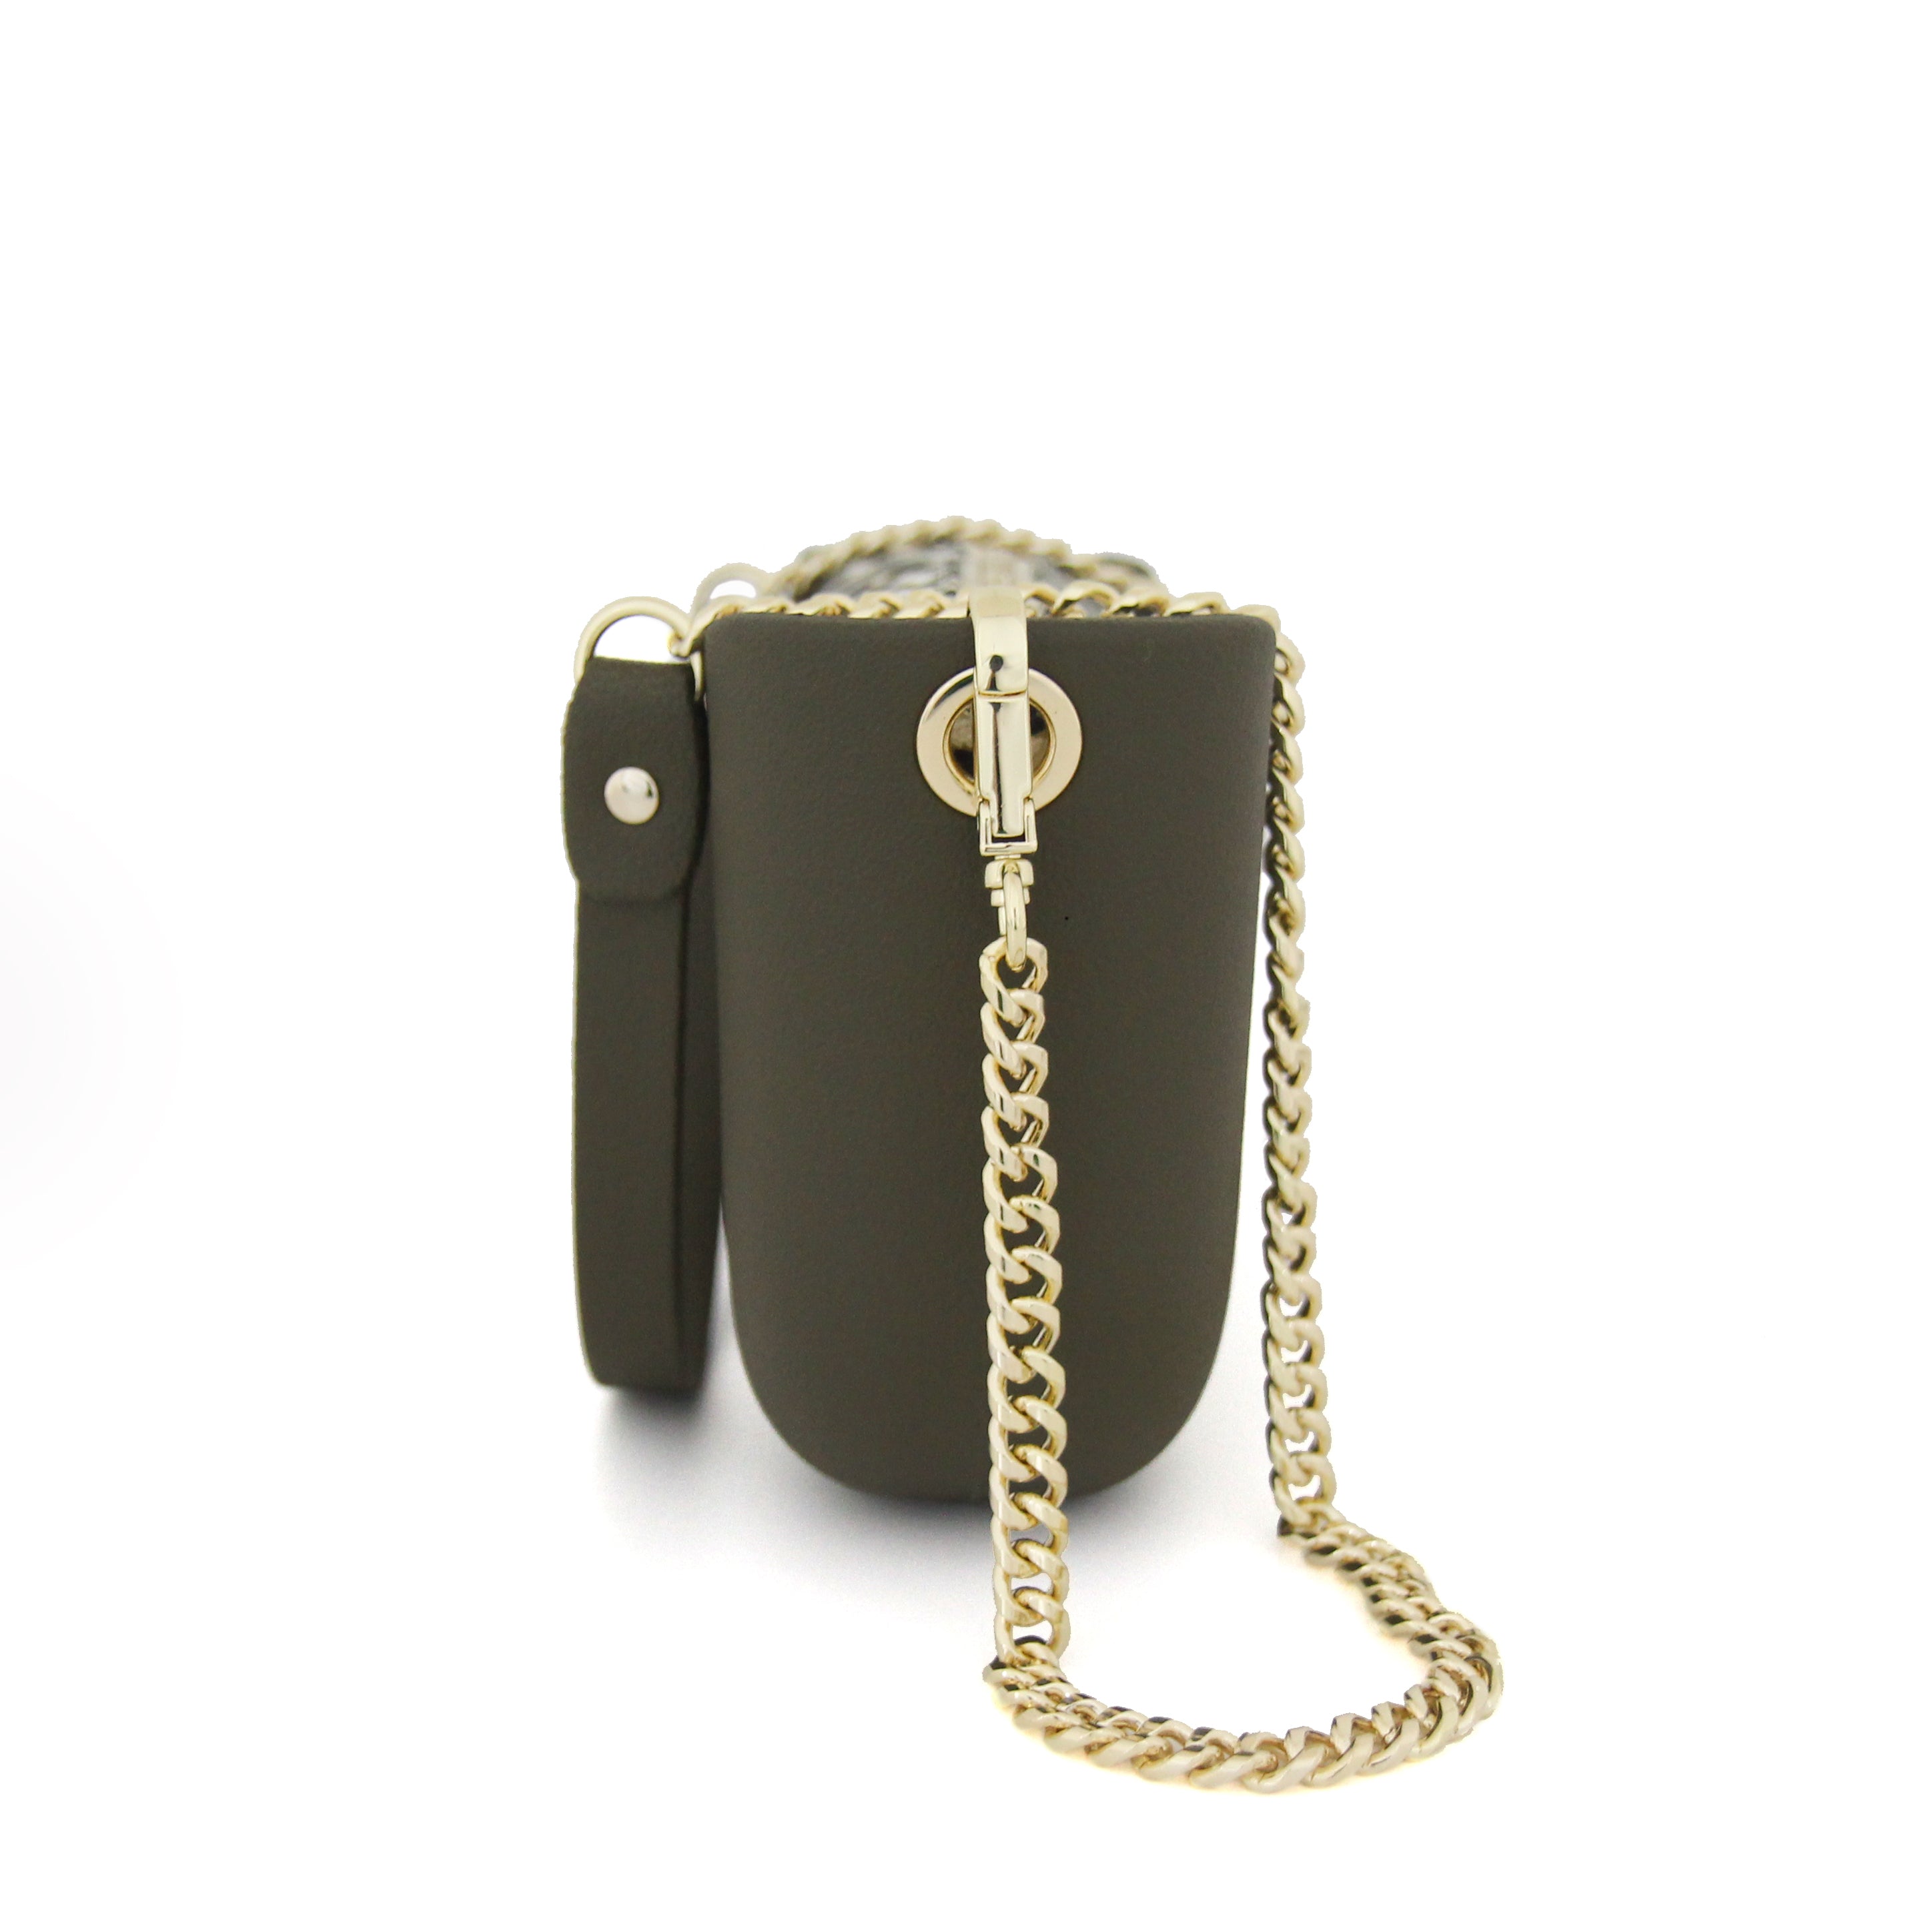 Classic KHAKI with leopard print canvas inner and khaki & gold chain strap